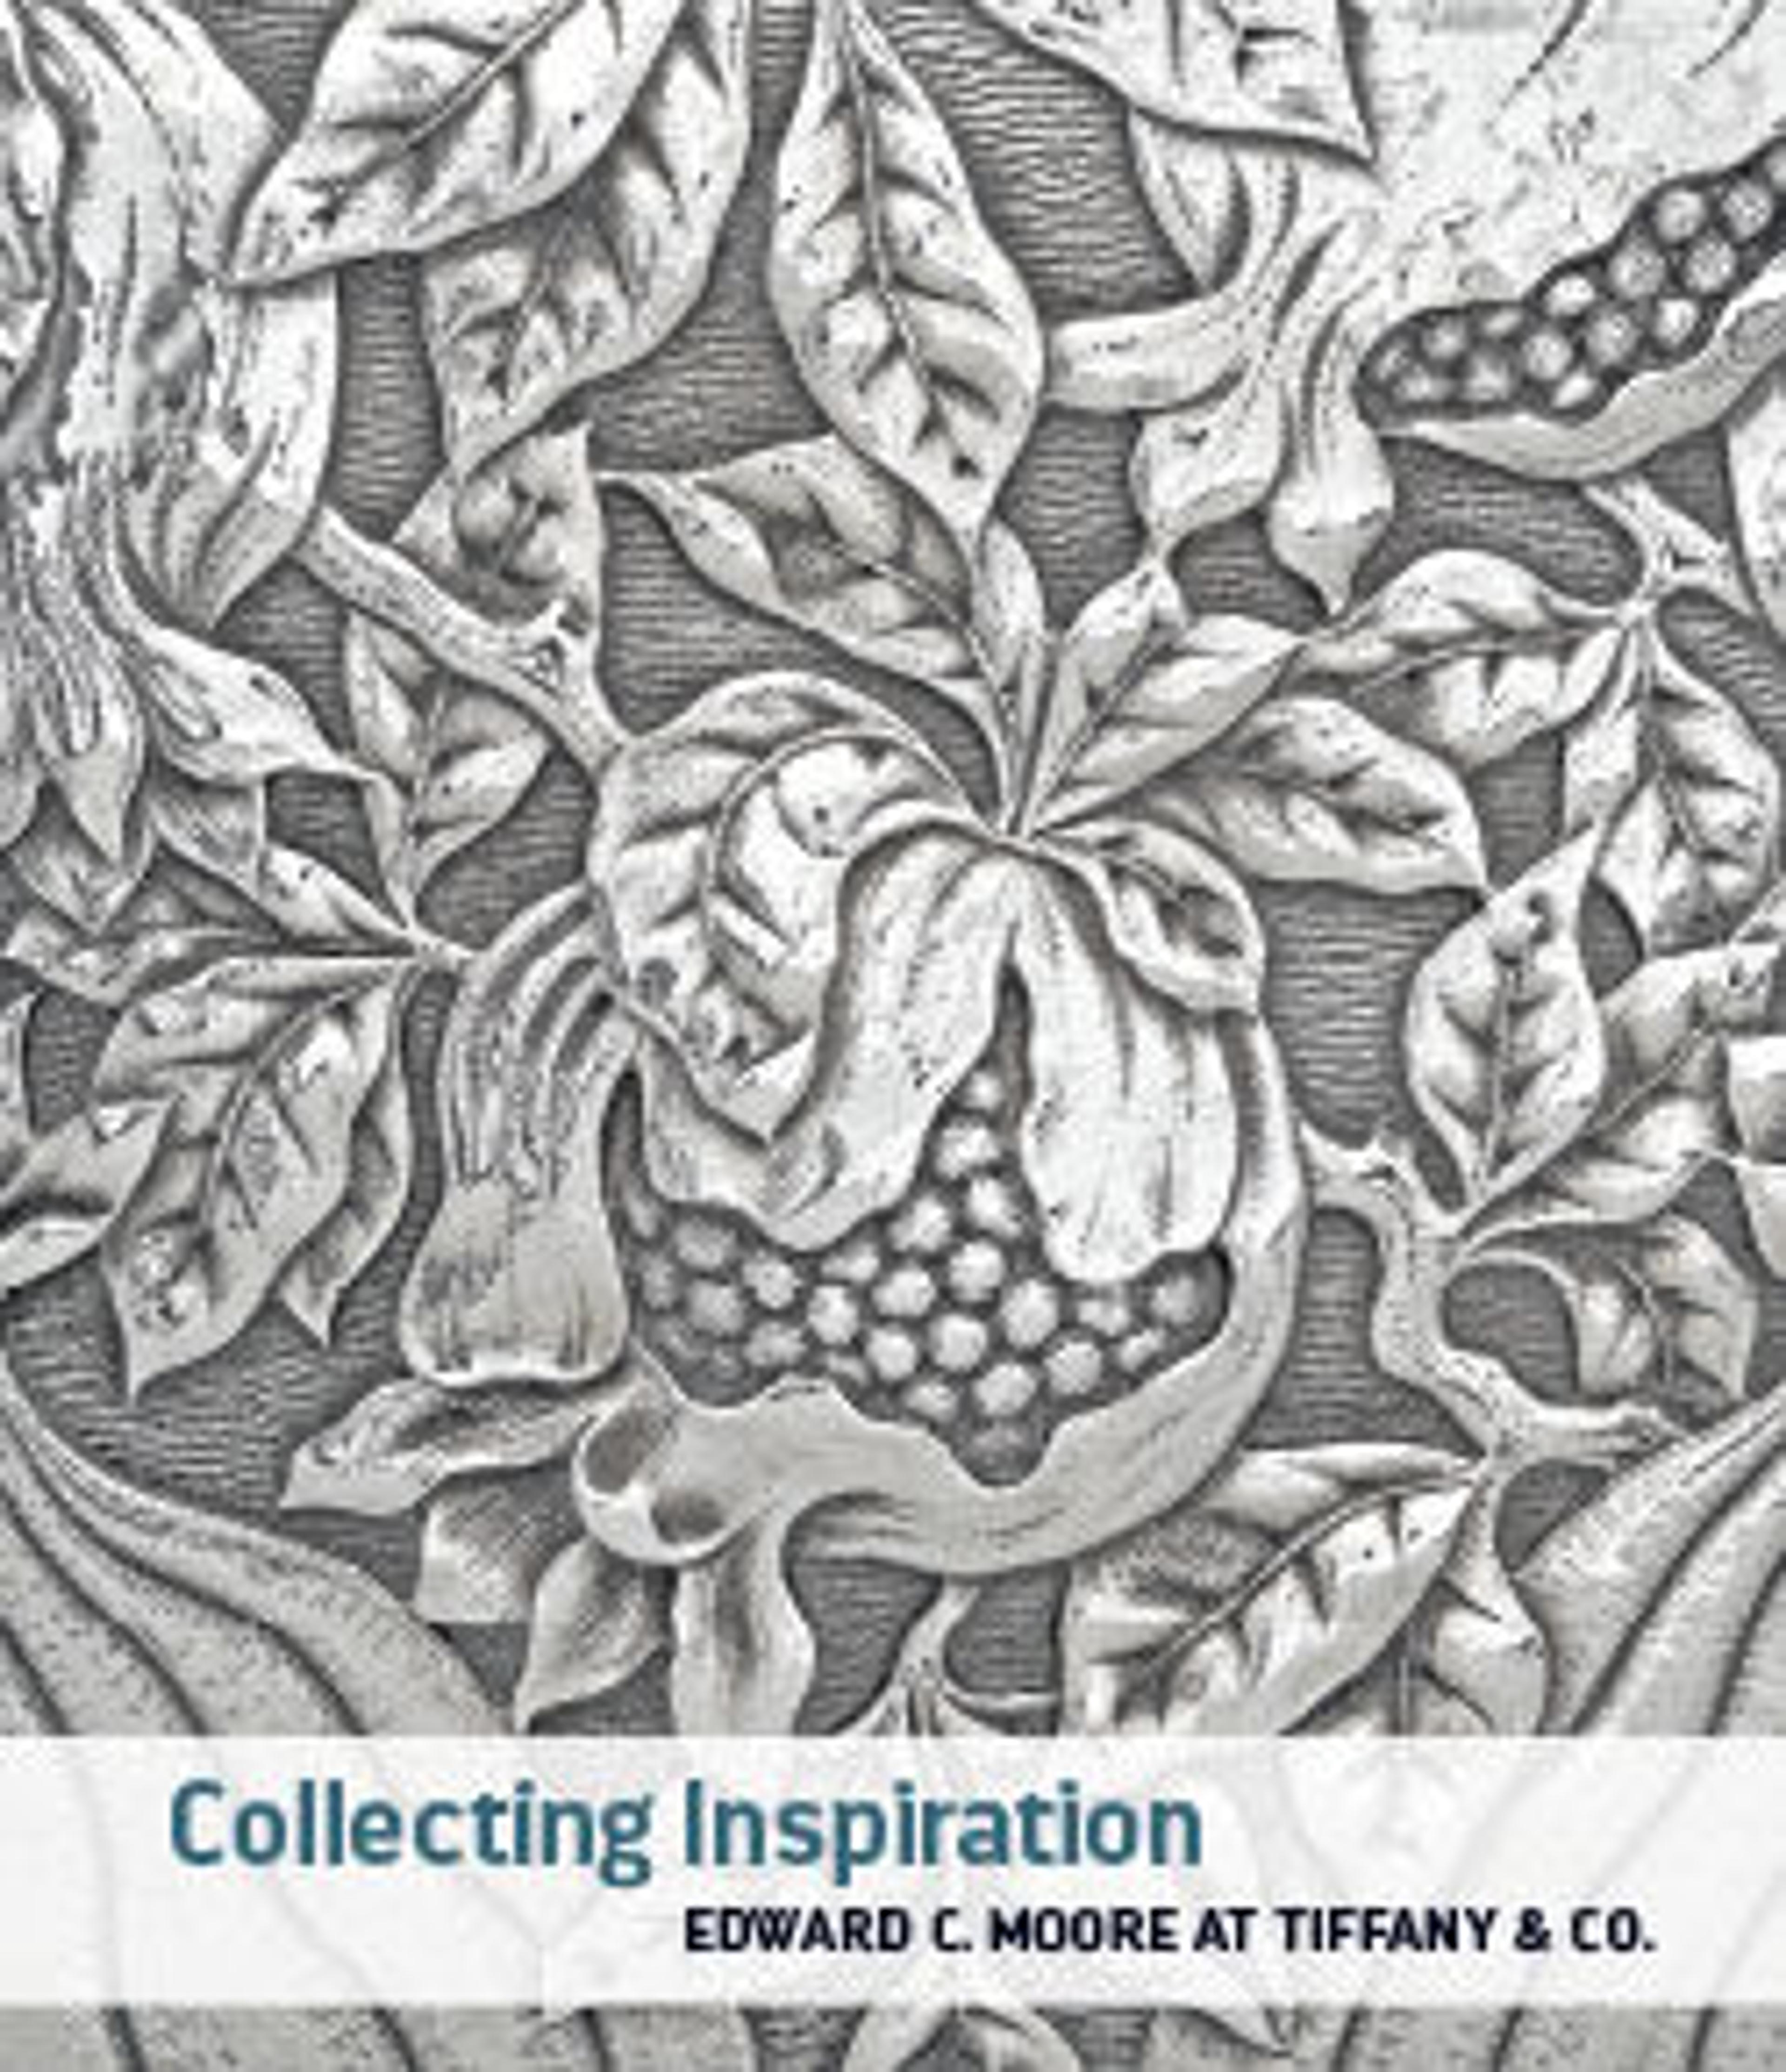 The cover of "Collecting Inspiration: Edward C. Moore at Tiffany & Co."